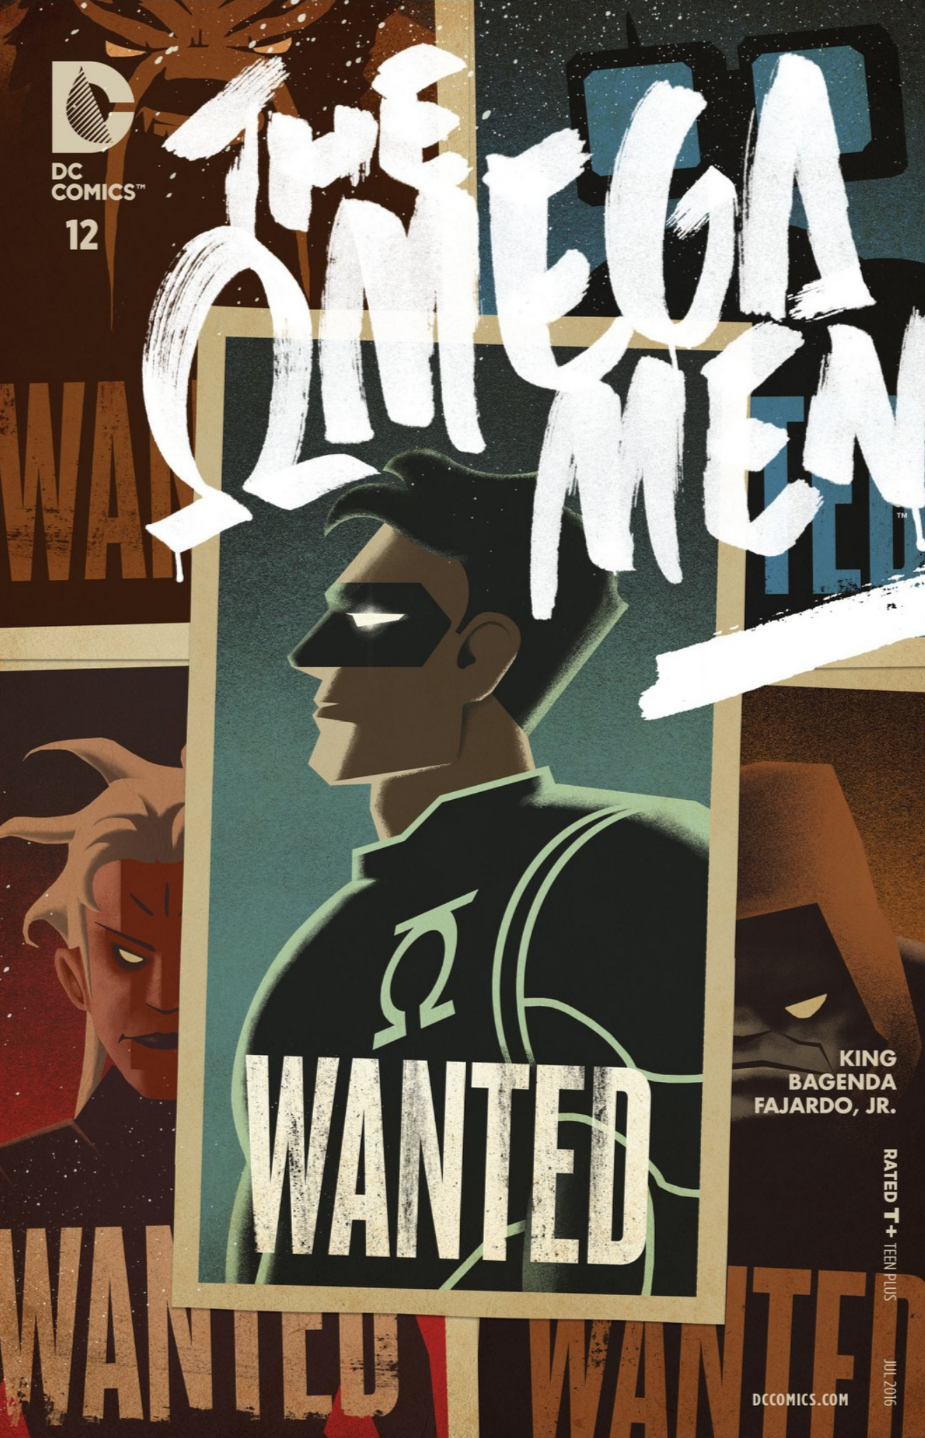 The Omega Men Just Pulled Off One Of The Darkest Endings In Superhero Comics Ever